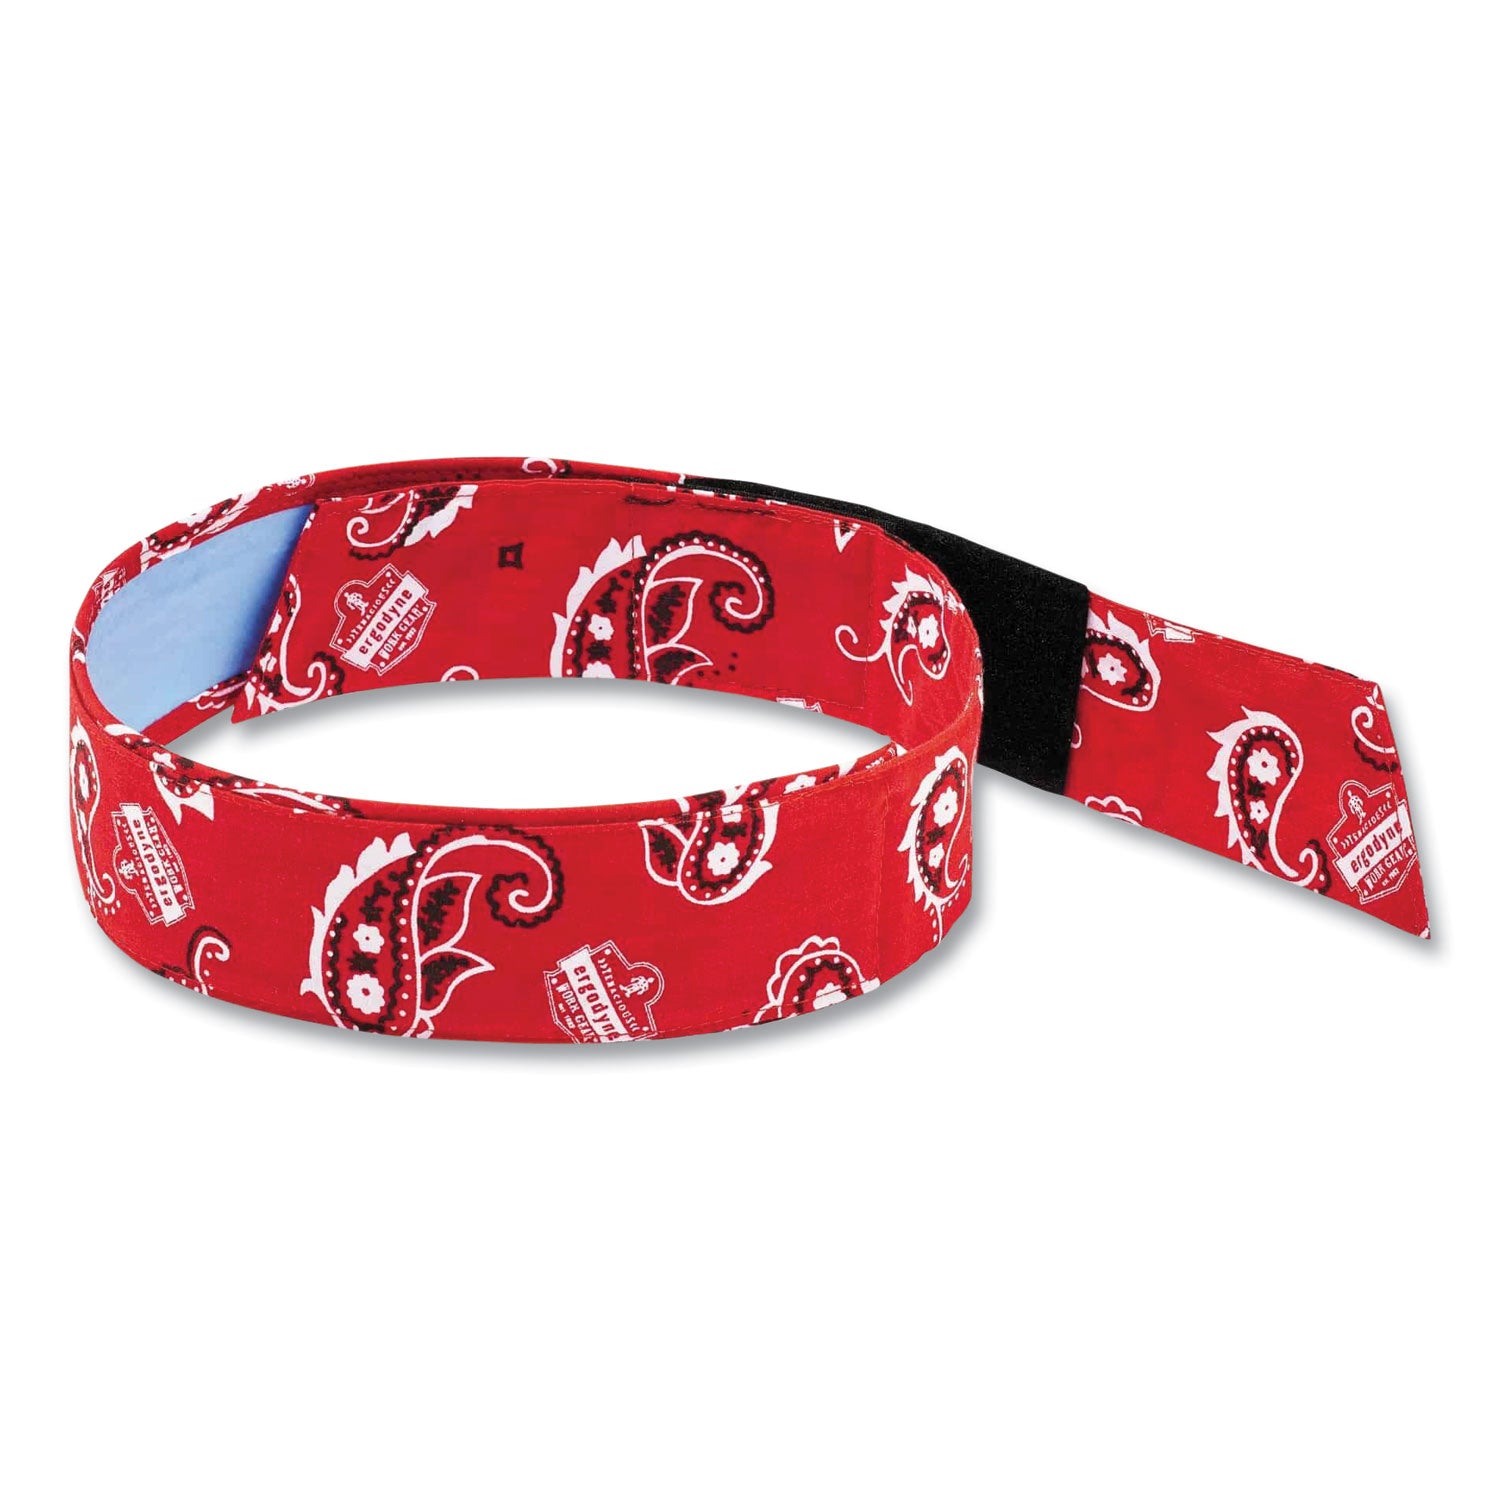 chill-its-6705ct-cooling-pva-hook-and-loop-bandana-headband-one-size-fits-most-red-western-ships-in-1-3-business-days_ego12573 - 1